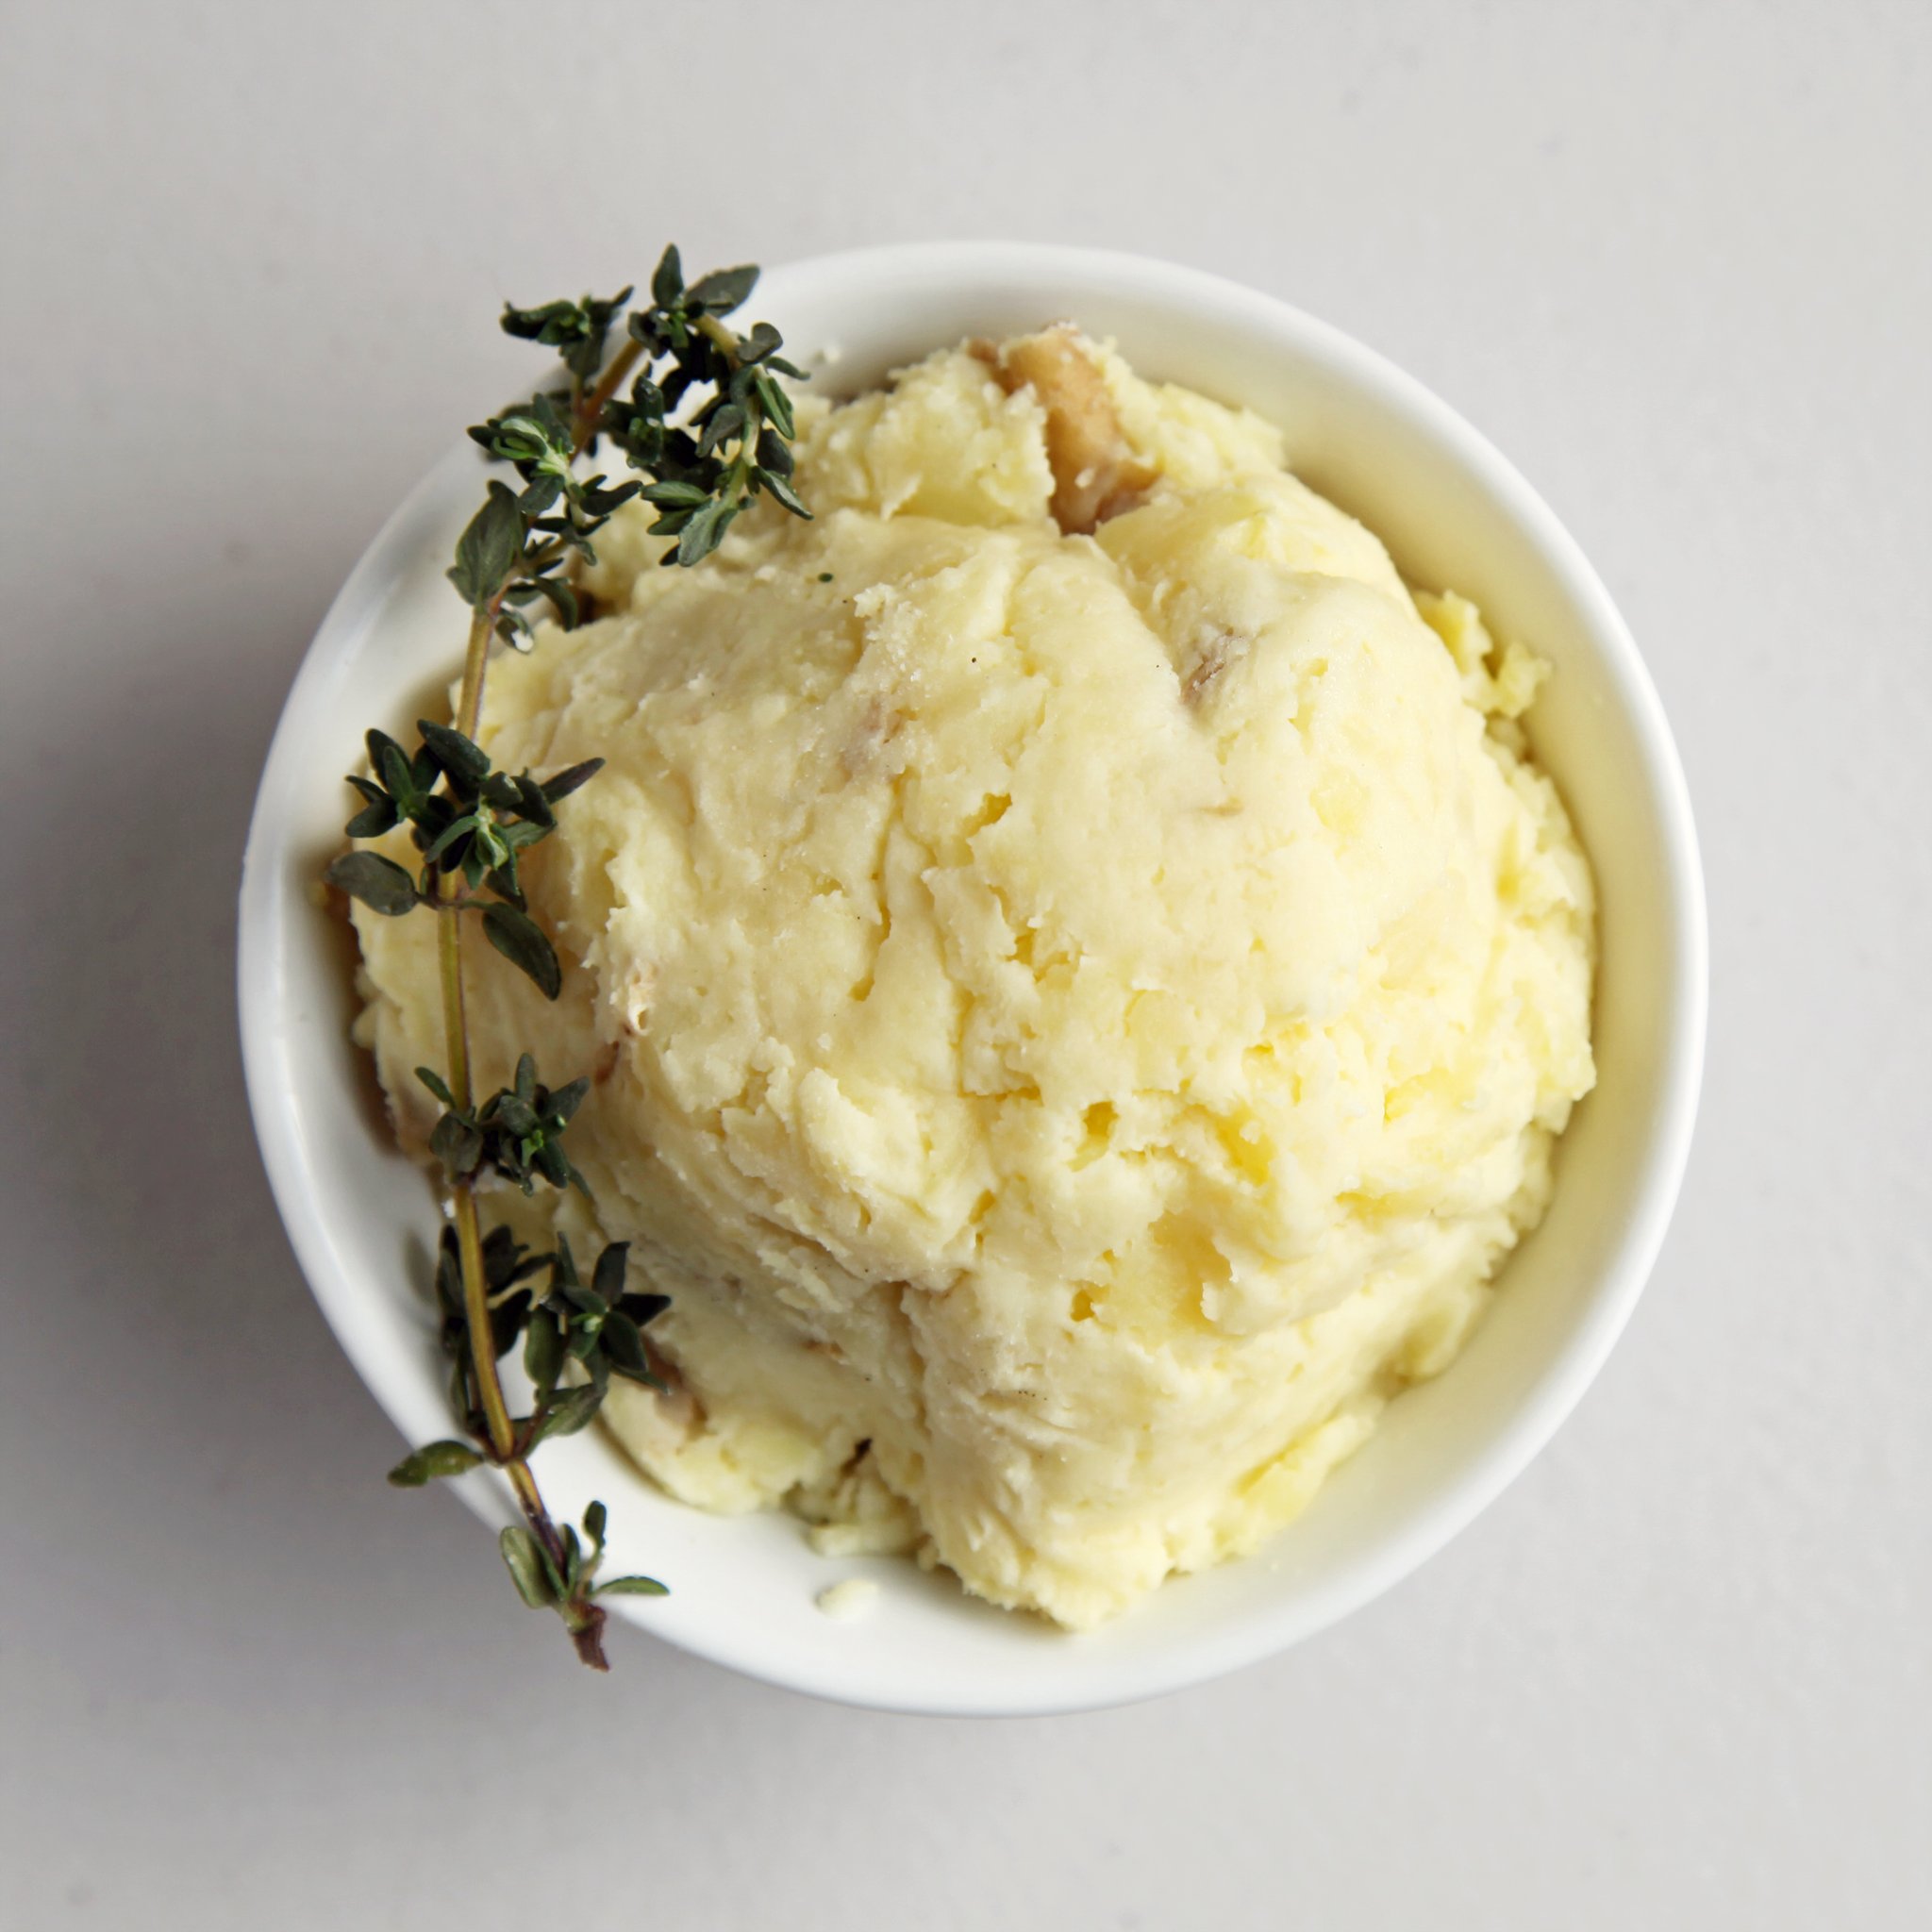 Tyler Florence's Hack Will Forever Change the Way You Make Mashed Potatoes